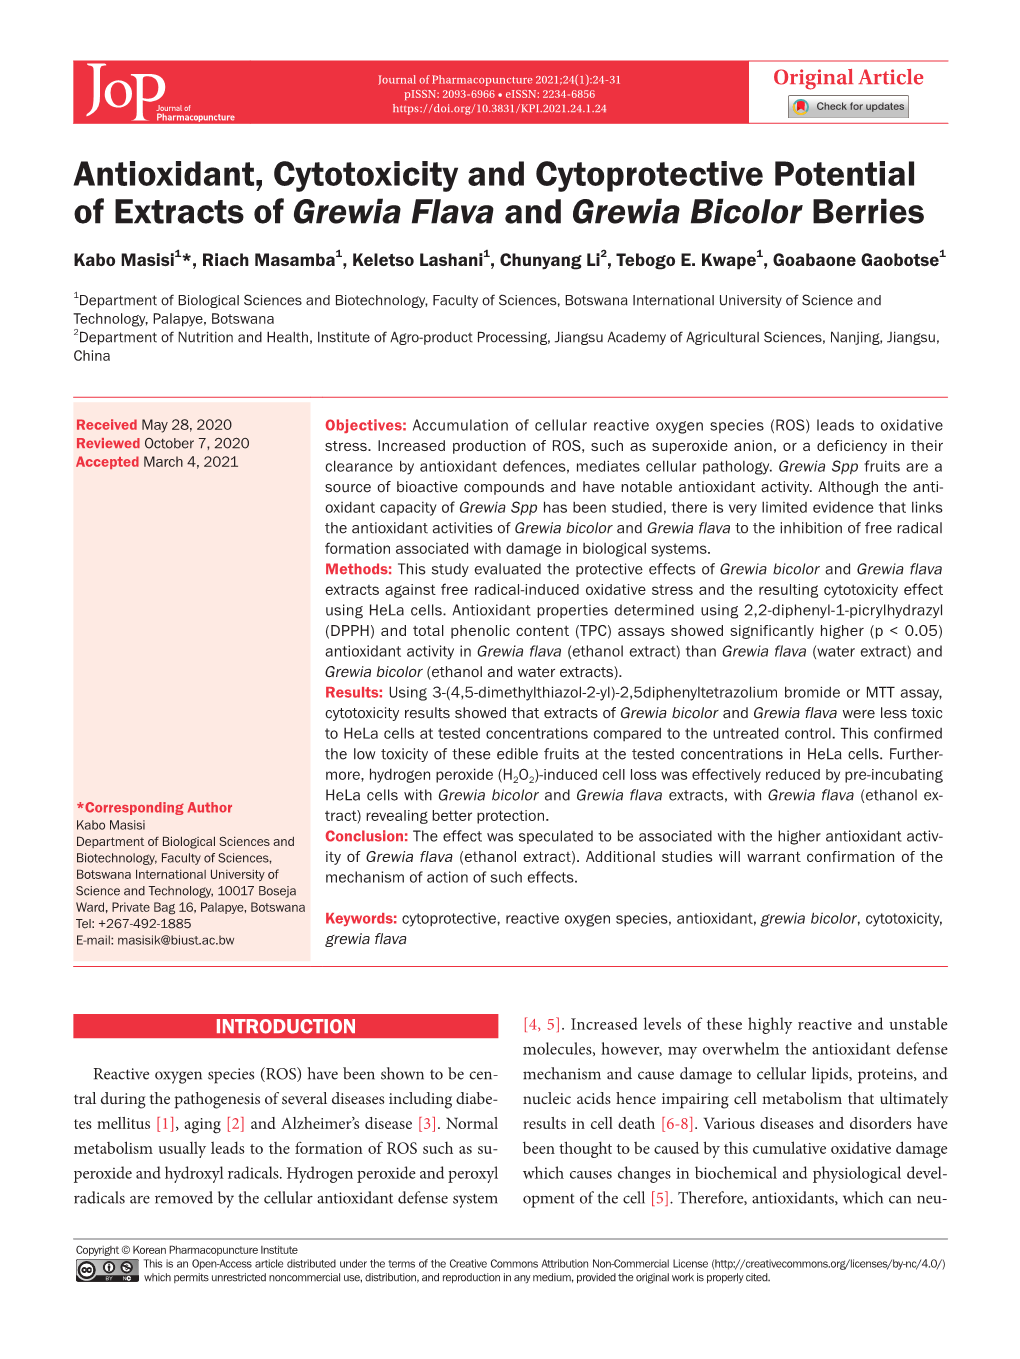 Antioxidant, Cytotoxicity and Cytoprotective Potential of Extracts